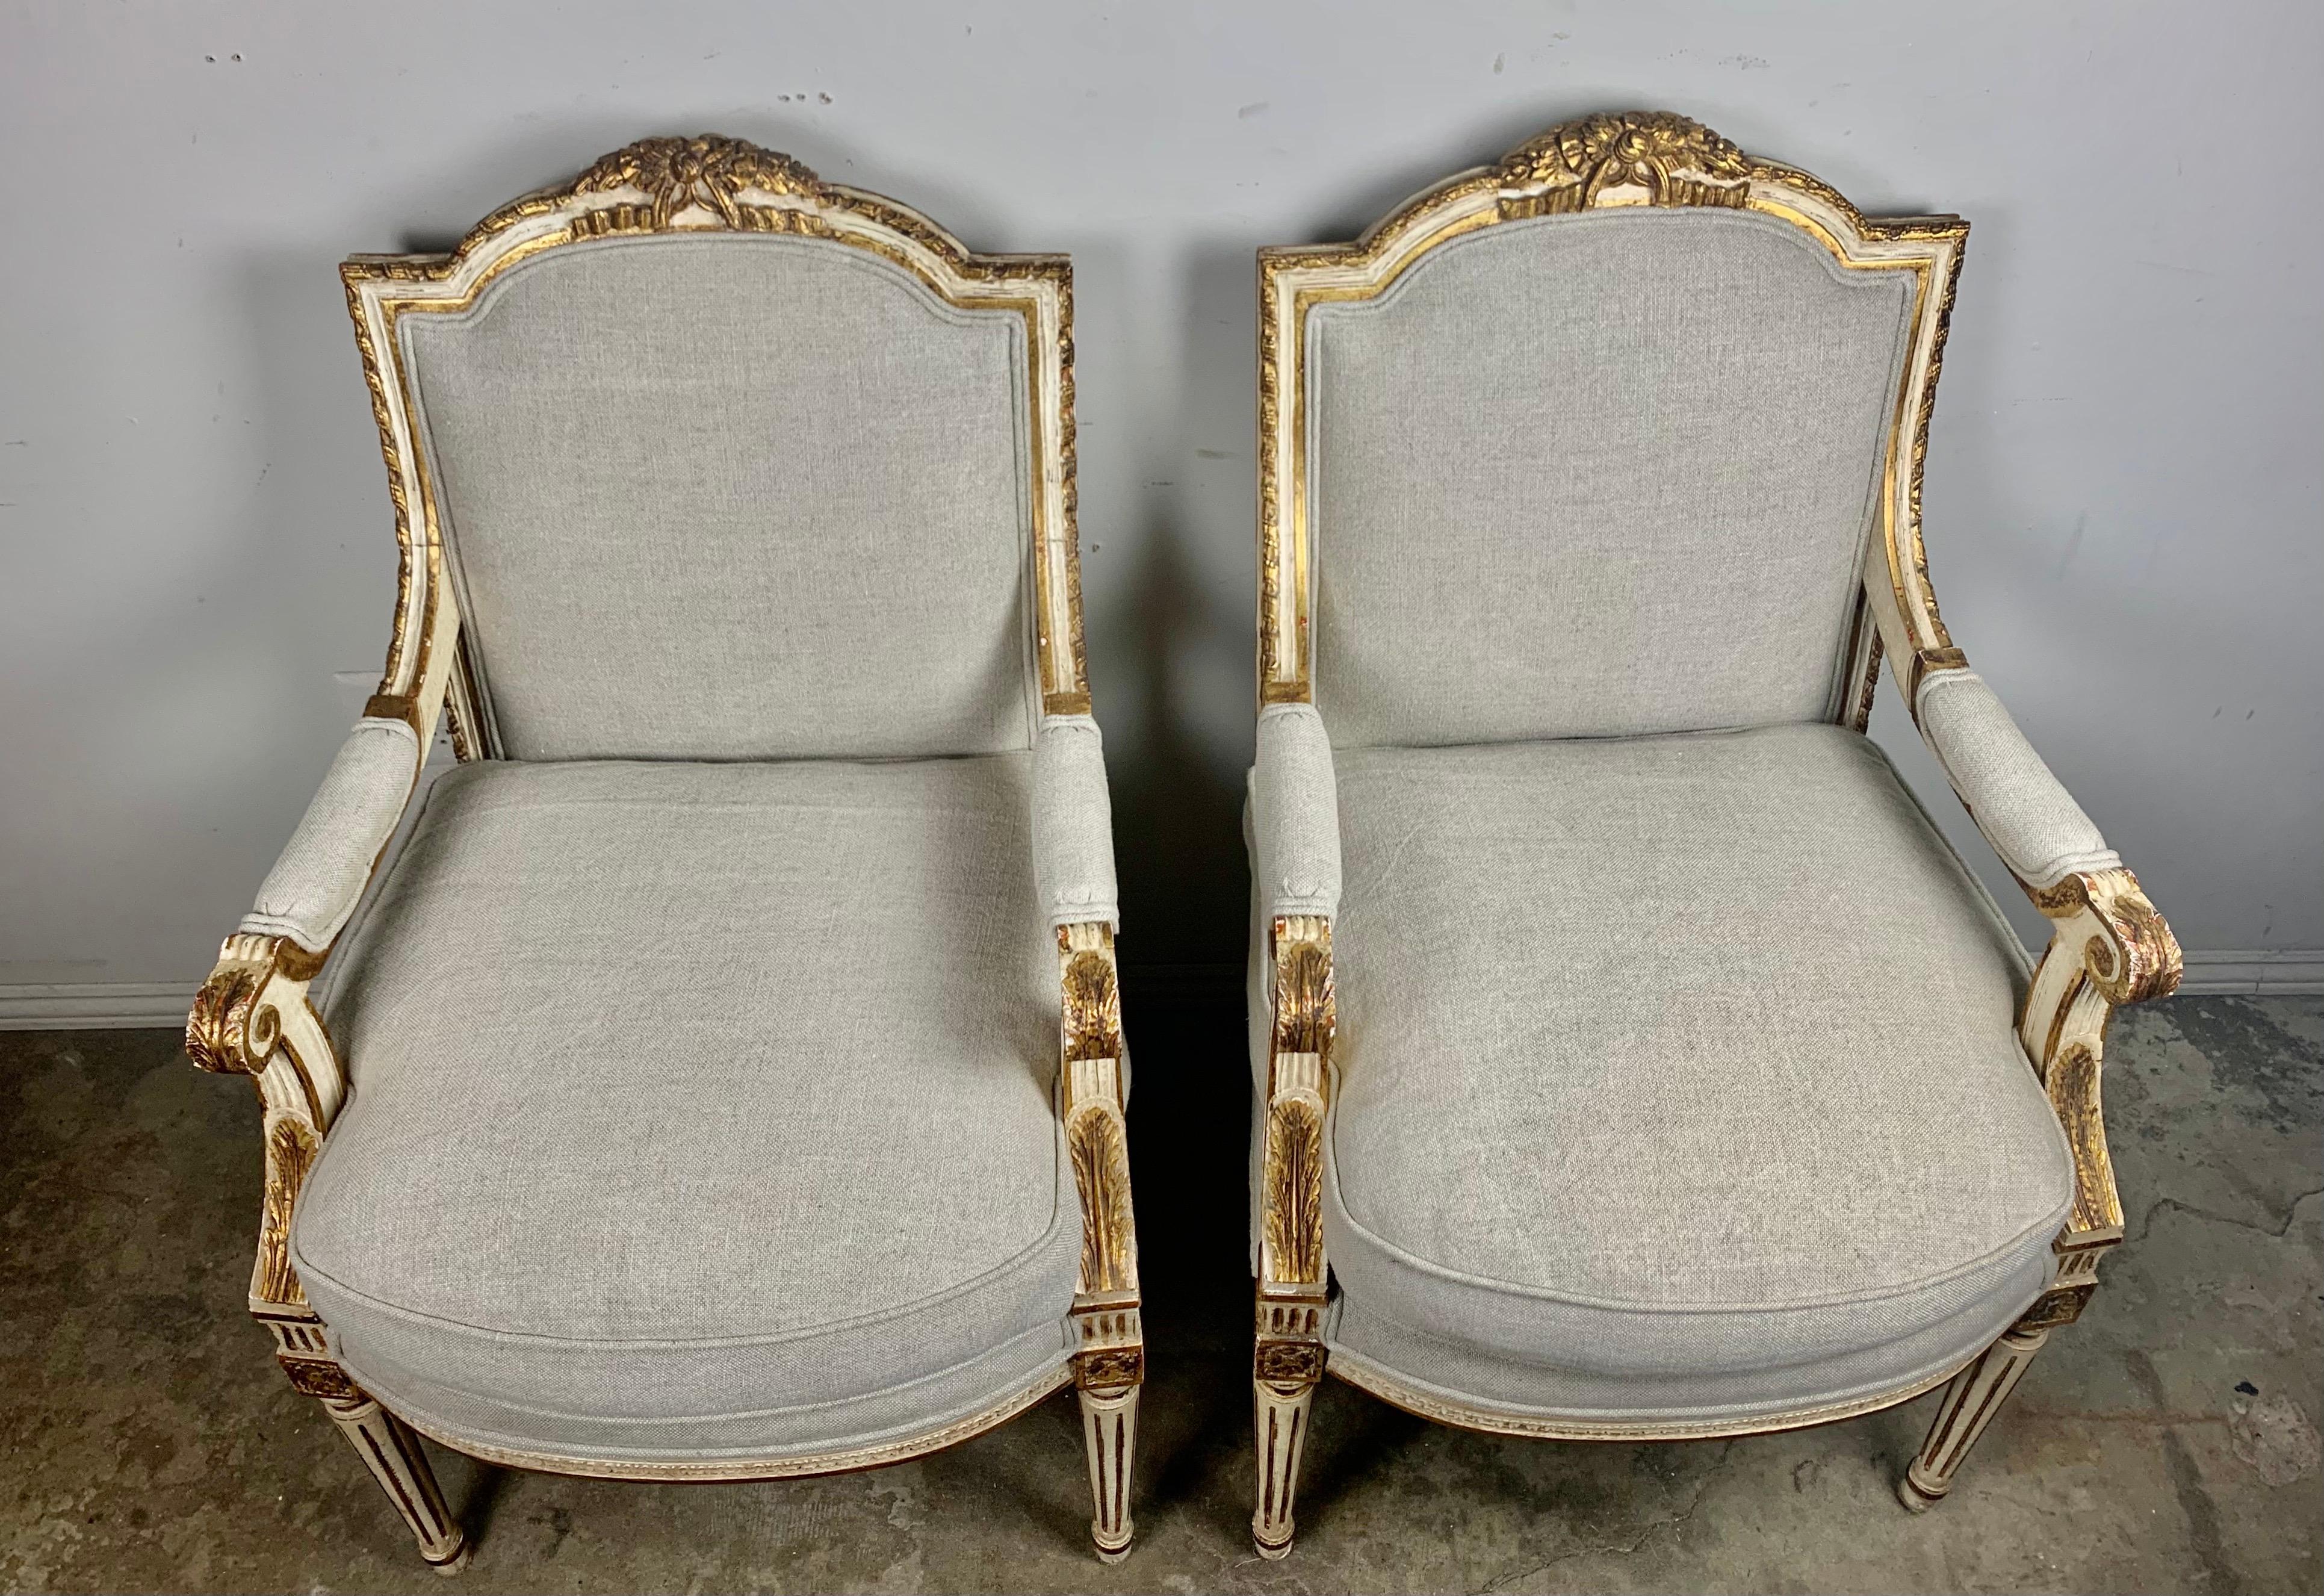 Pair of French Louis XVI painted and parcel-gilt armchairs standing on four straight fluted legs. The armchairs have 22-karat gilt carving throughout. The armchairs are newly upholstered in a washed Belgium linen with loose down filled cushions.